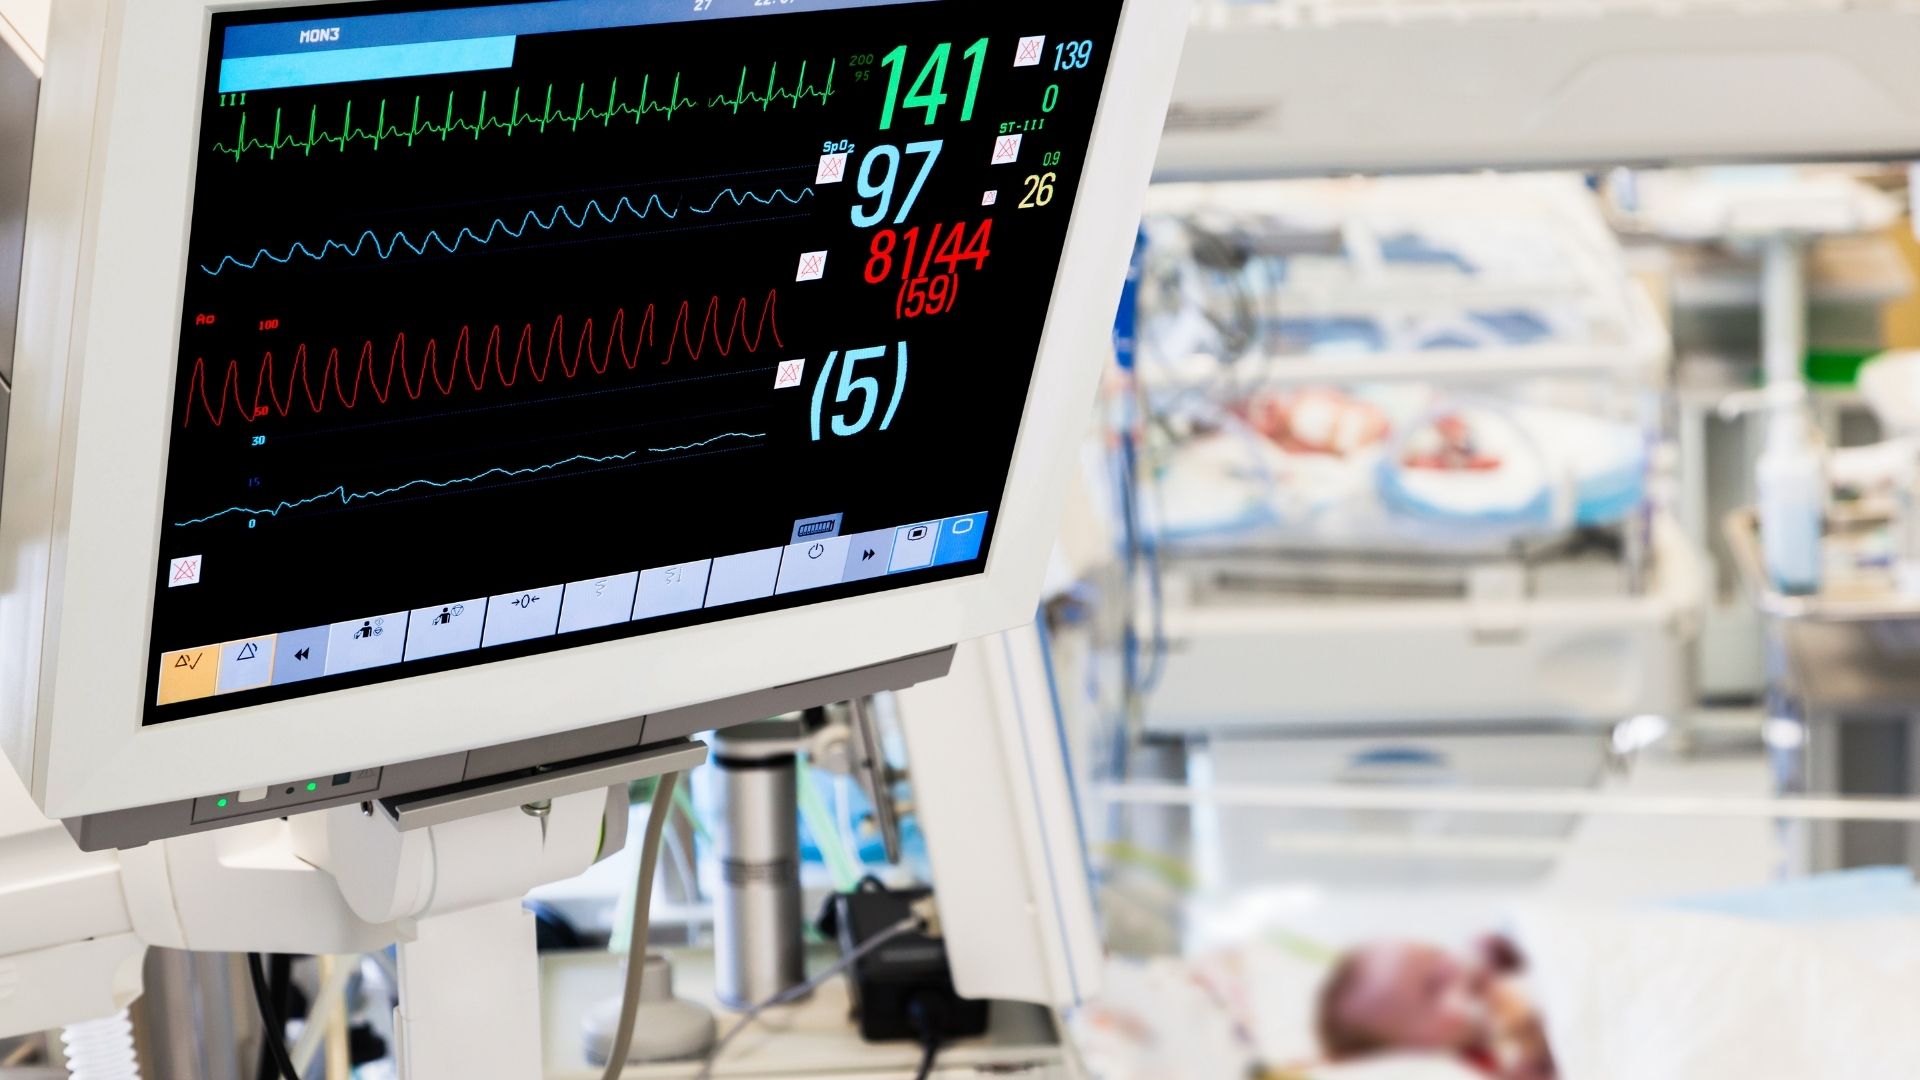 How To Read Monitor In Hospital